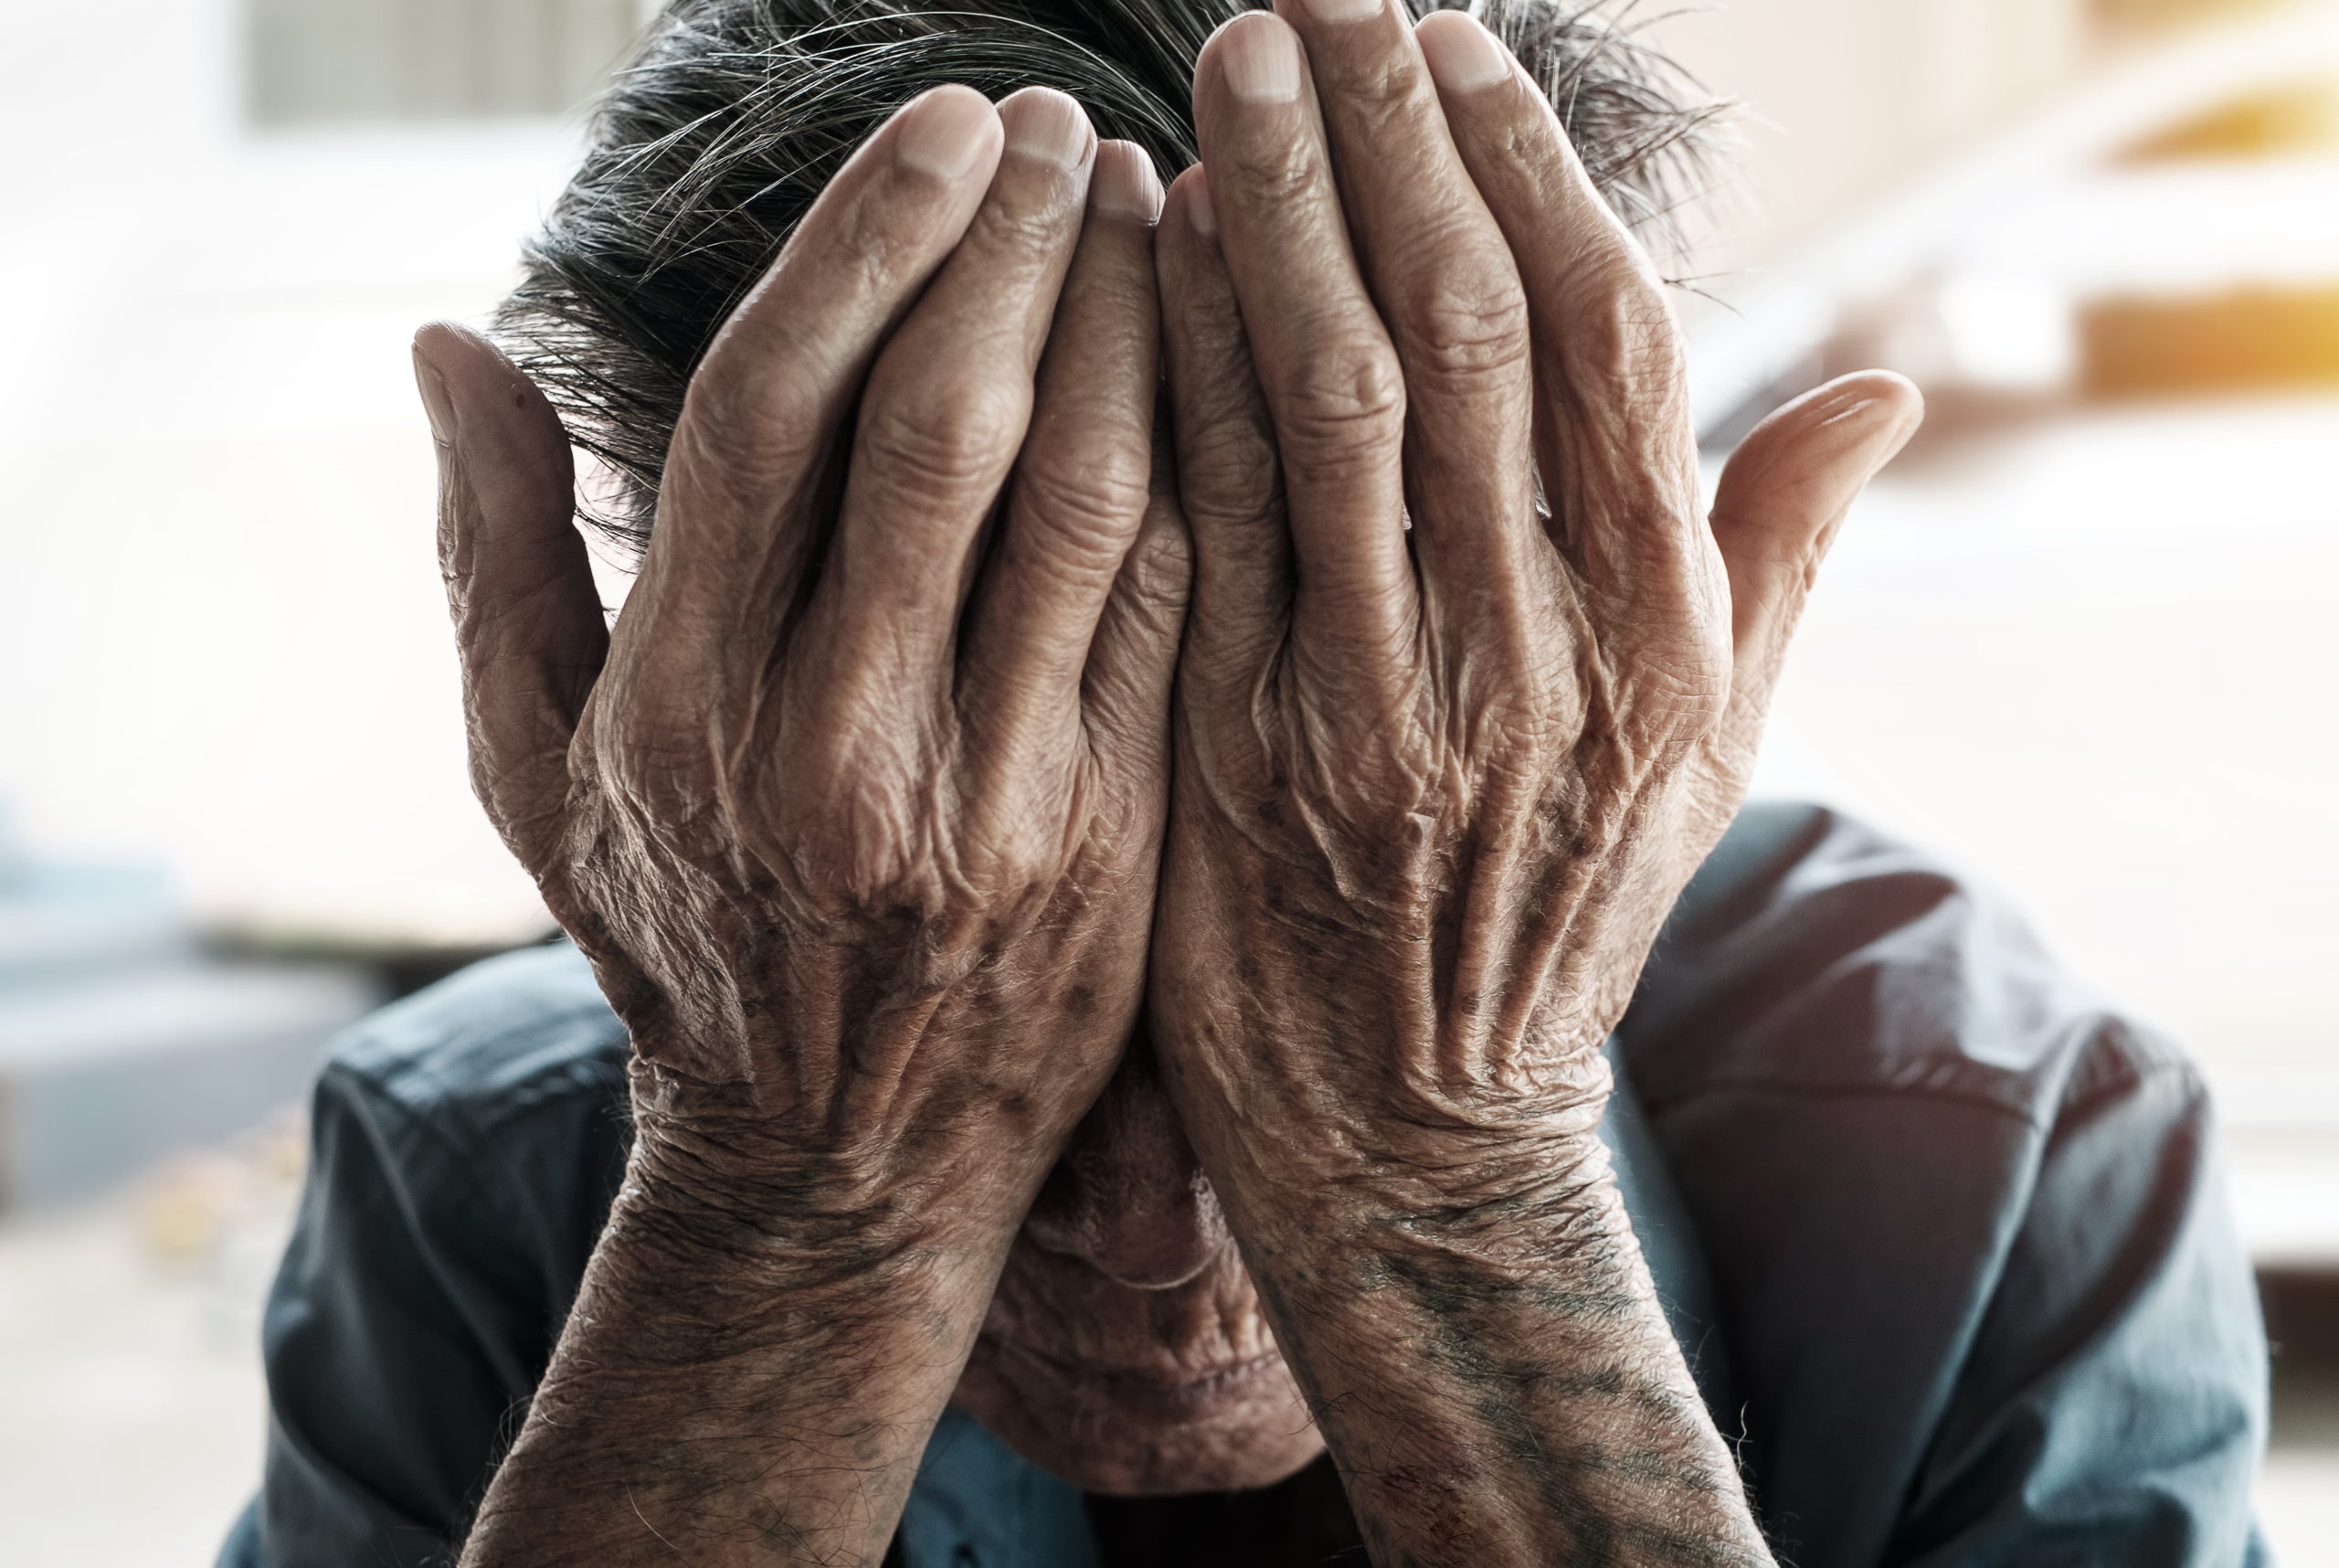 depression in older adults and the elderly